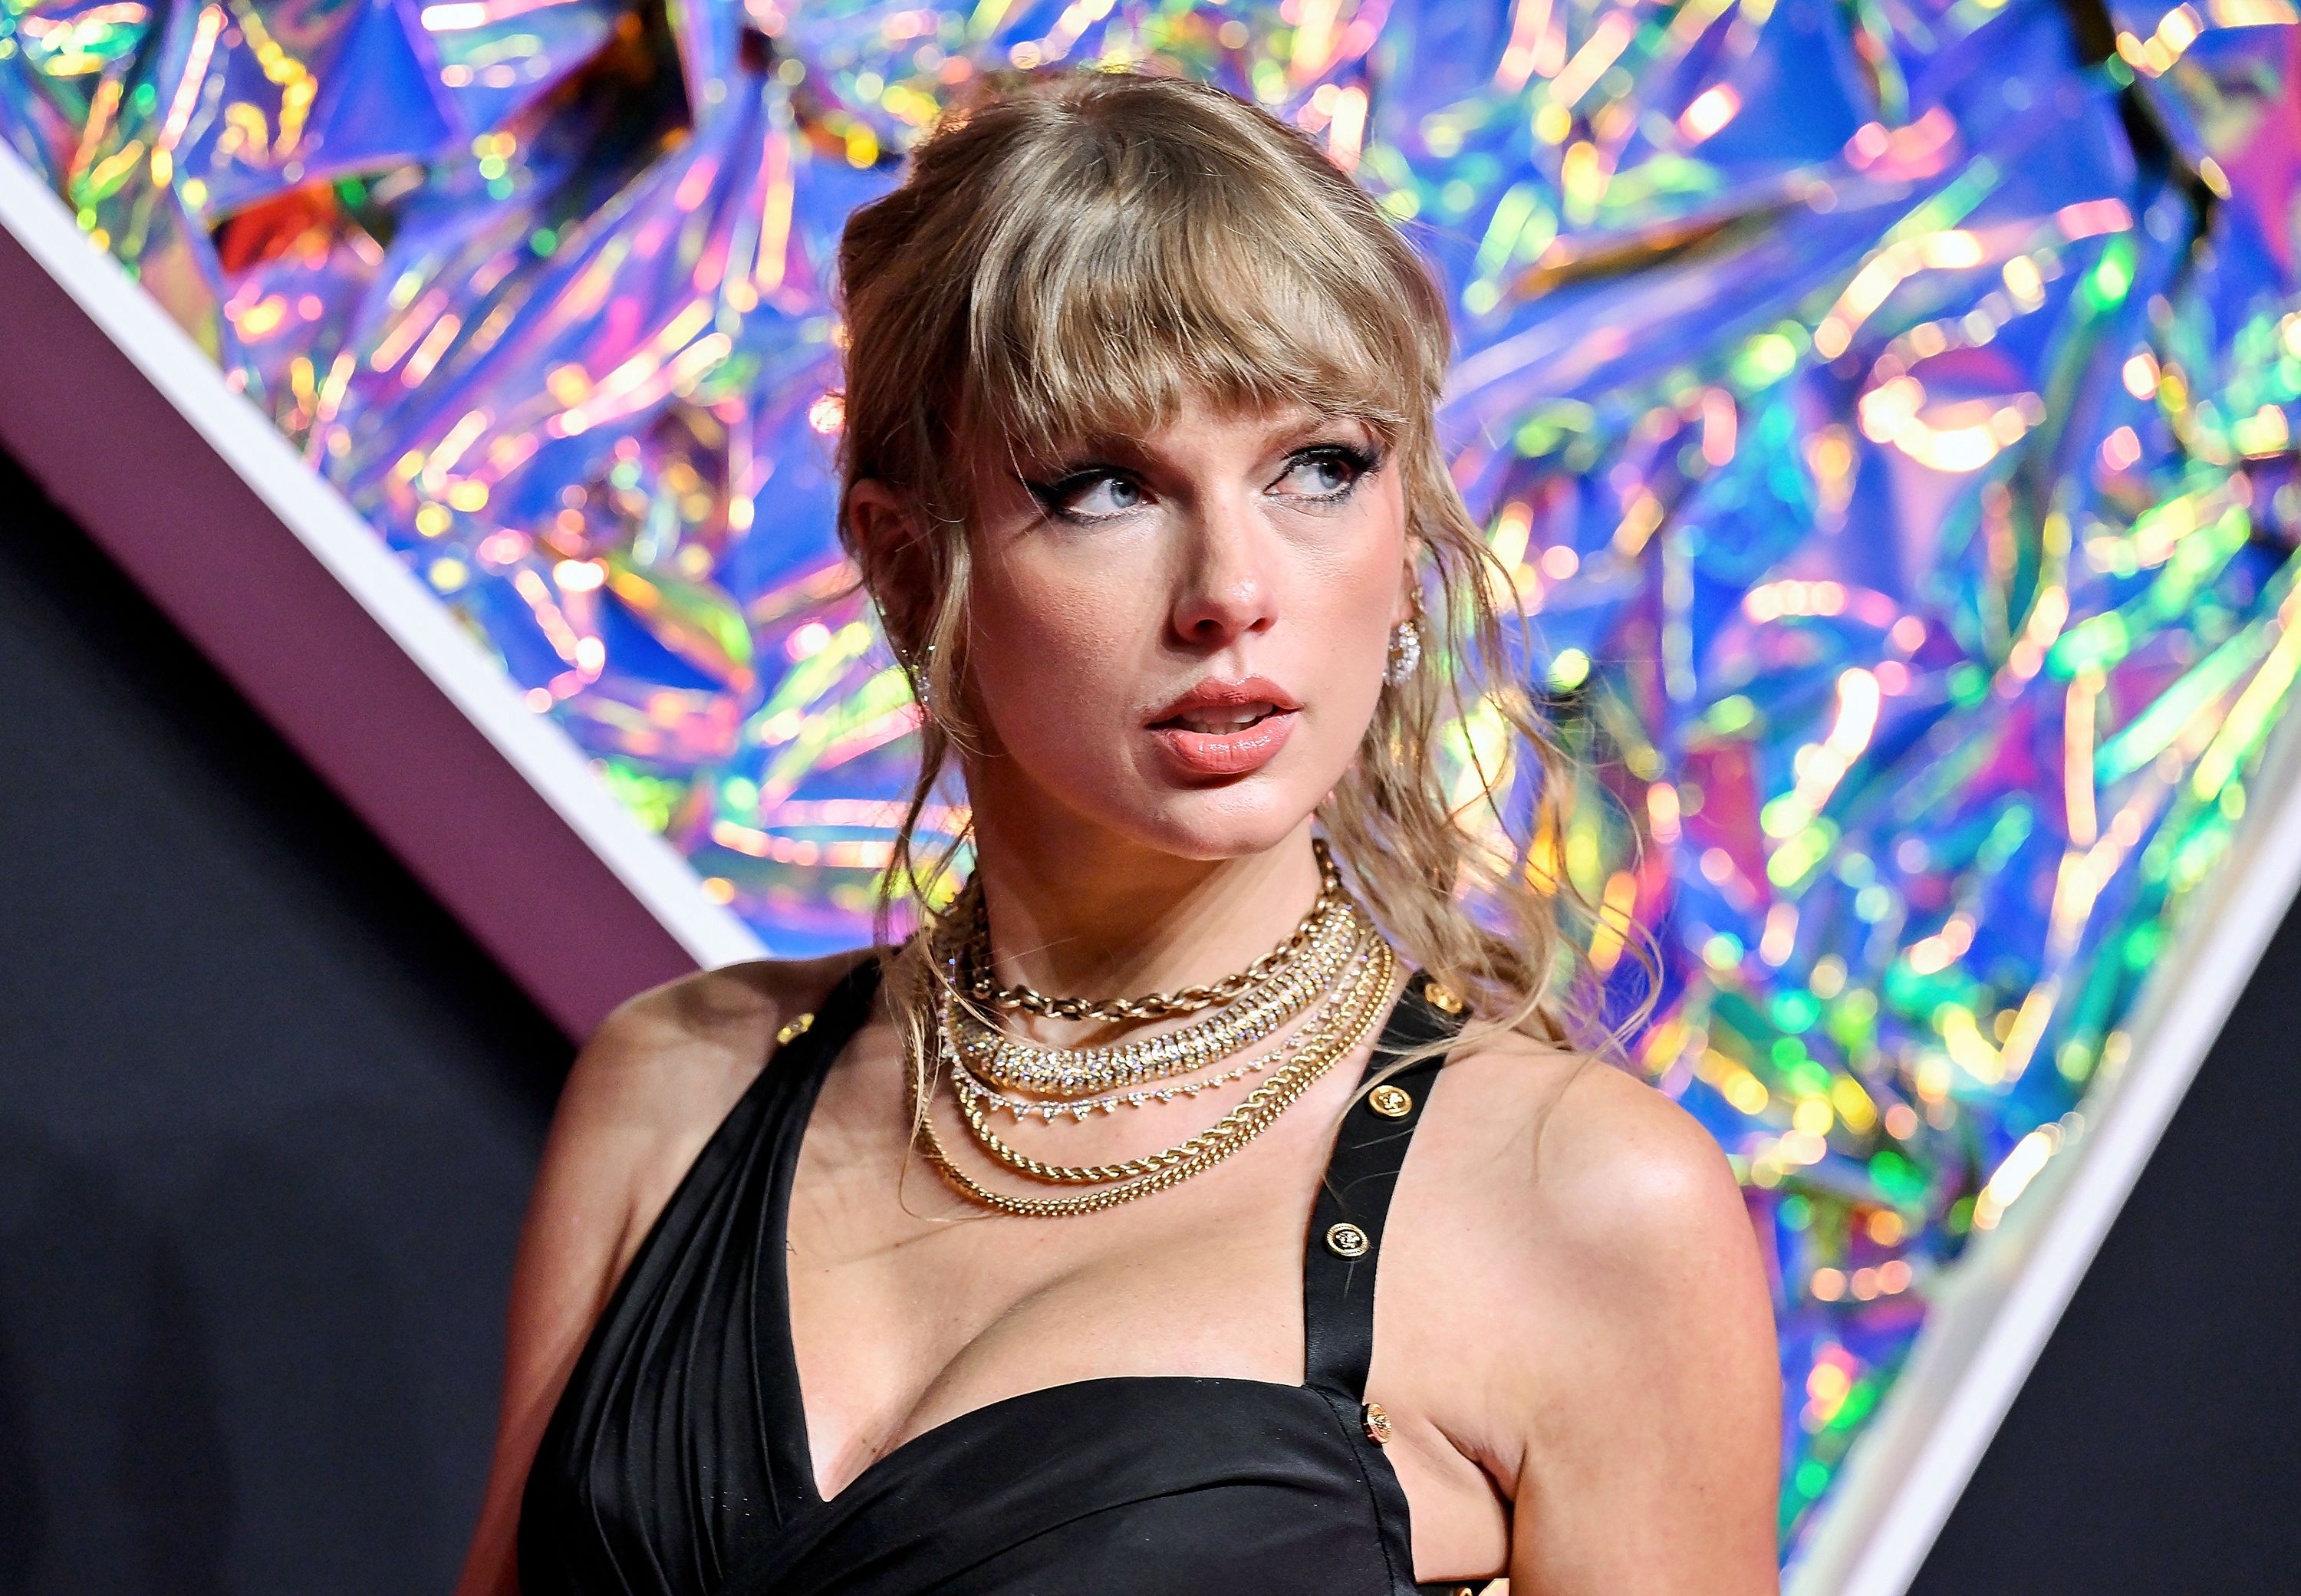 Taylor Swift's associates dismayed by New York Times piece speculating on  her sexuality: 'Invasive, untrue and inappropriate